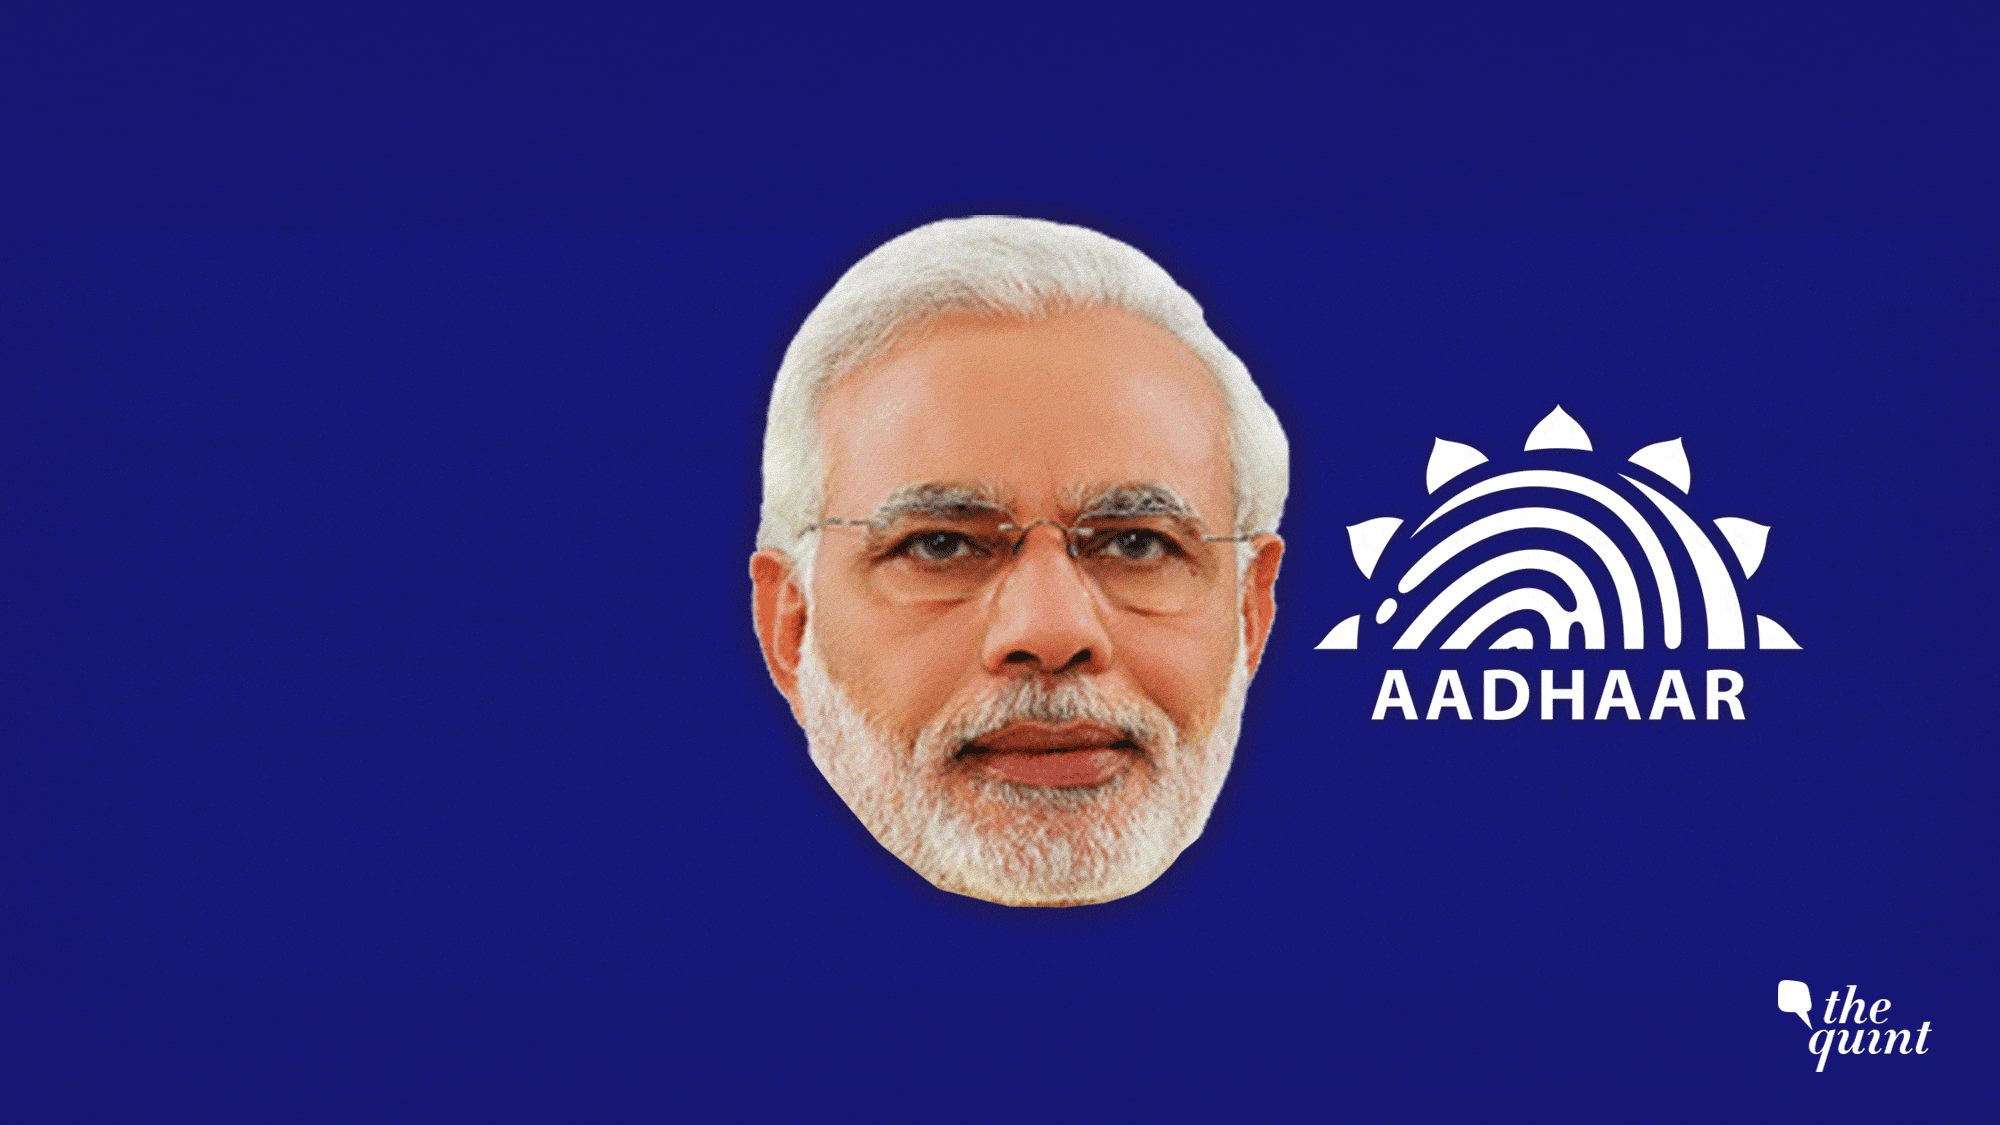  From Aadhaar to CBI, mapping Modi government ‘don’t care’ attitude.